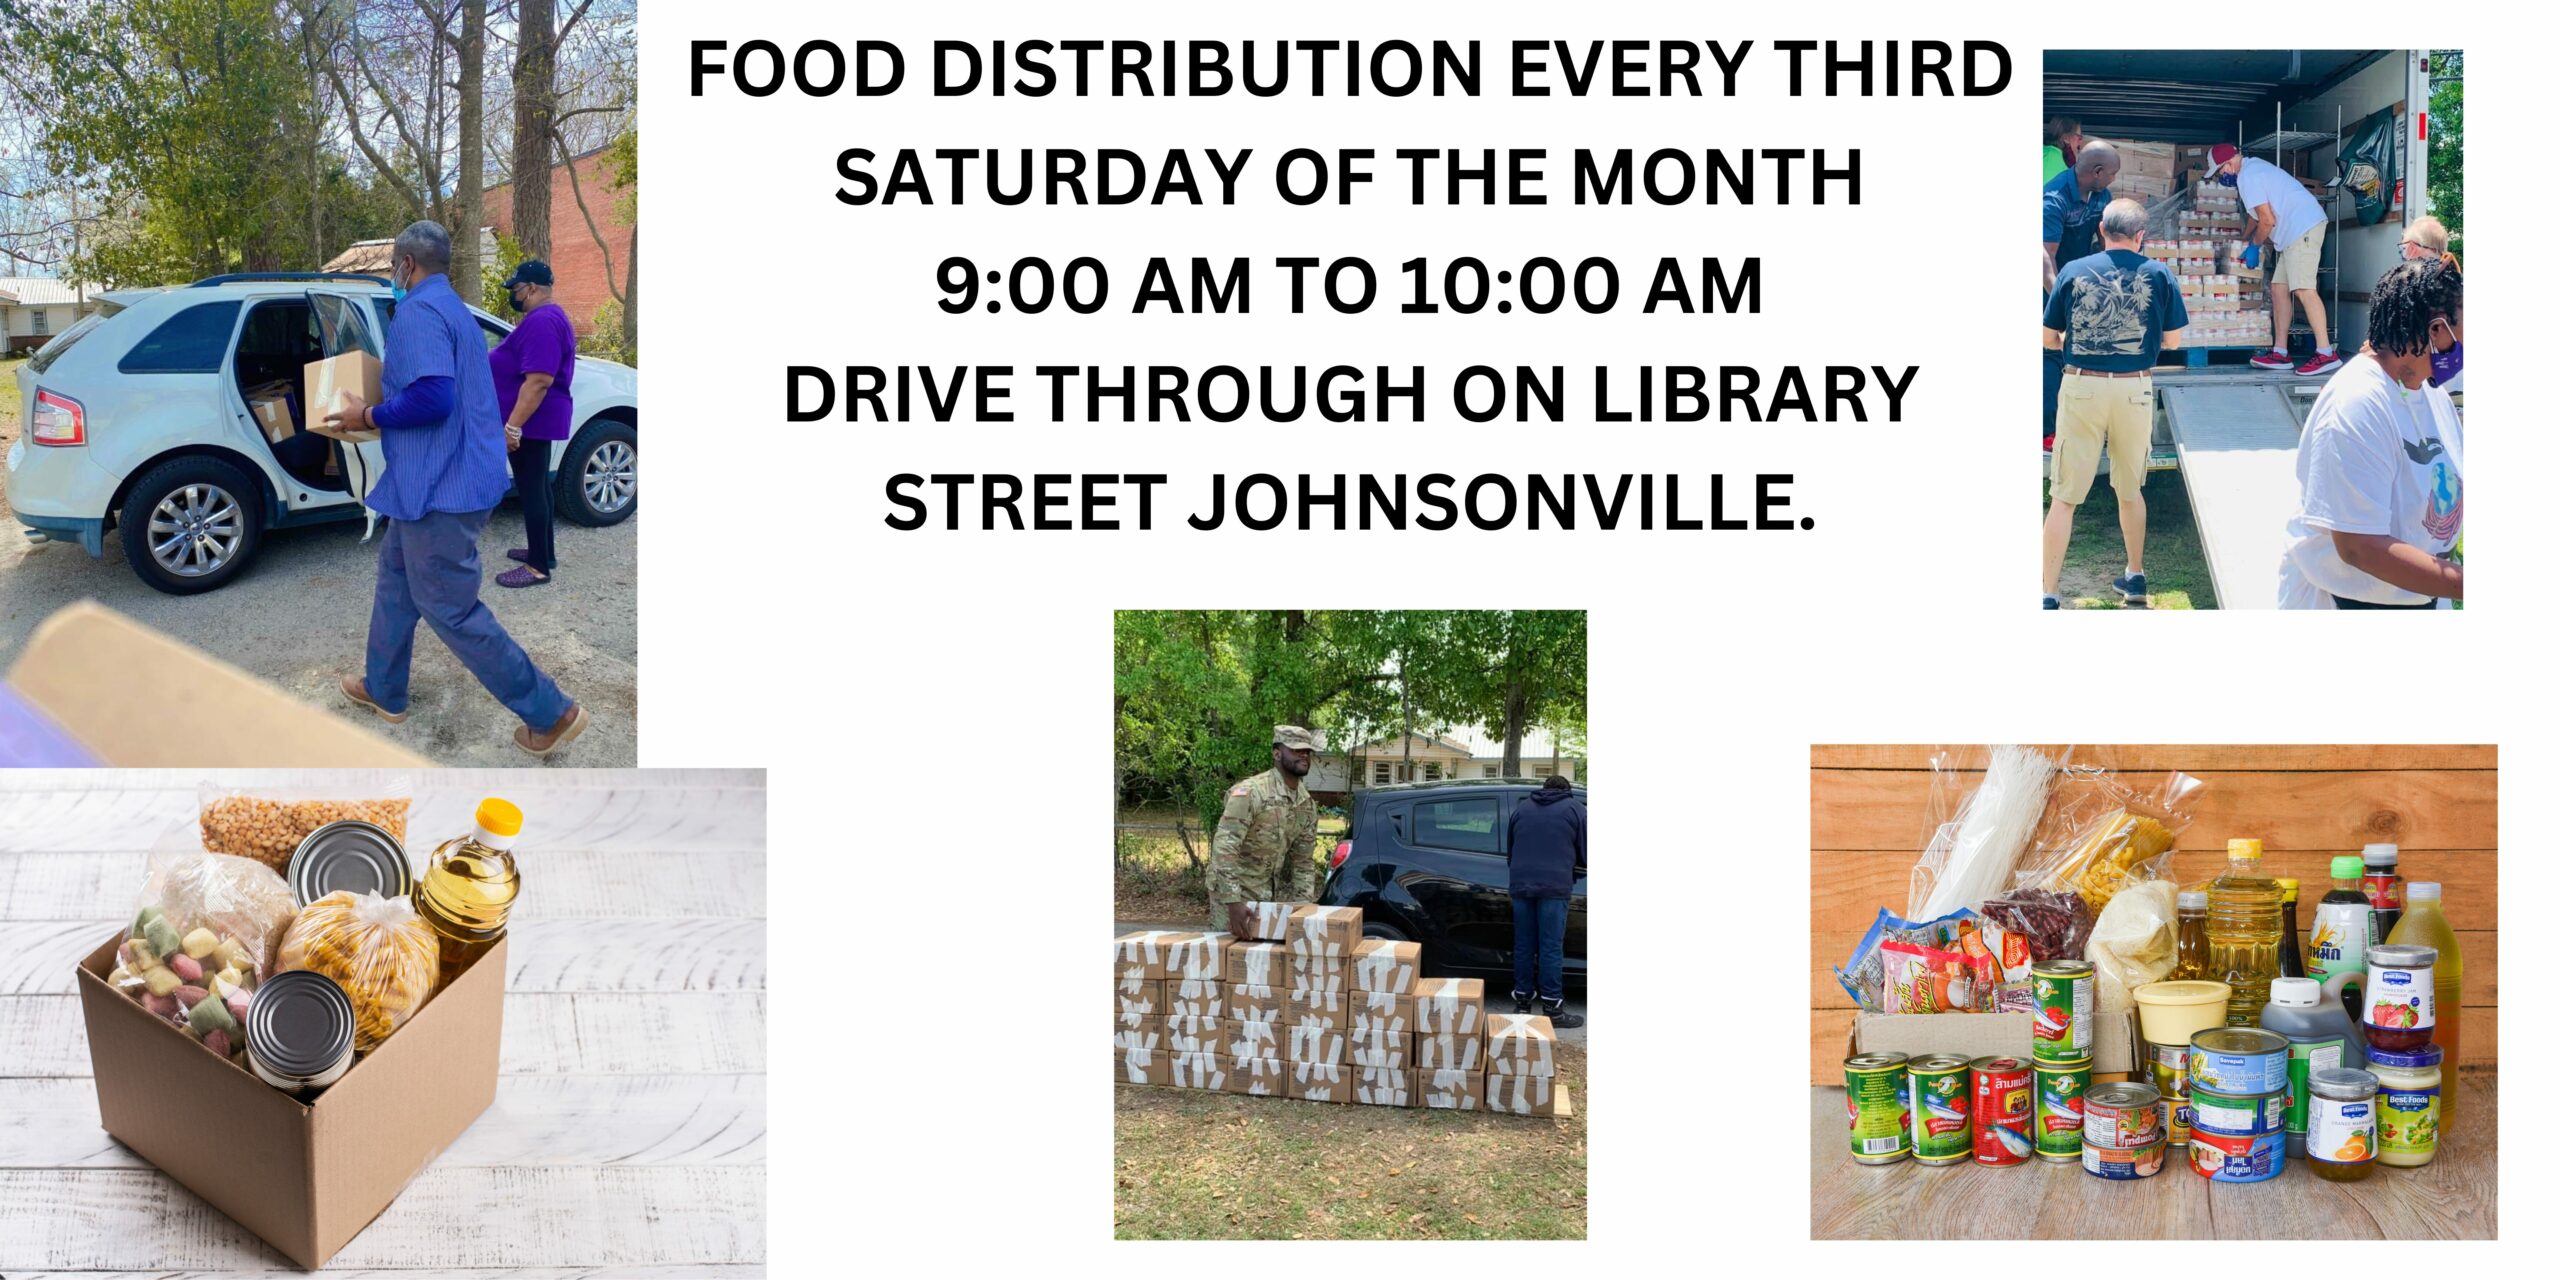 FOOD DISTRIBUTION EVERY THIRD SATURDAY OF THE MONTH 9:00 AM TO 10:00 AM. DRIVE THROUGH ON LIBRARY STREET JOHNSONVILLE.